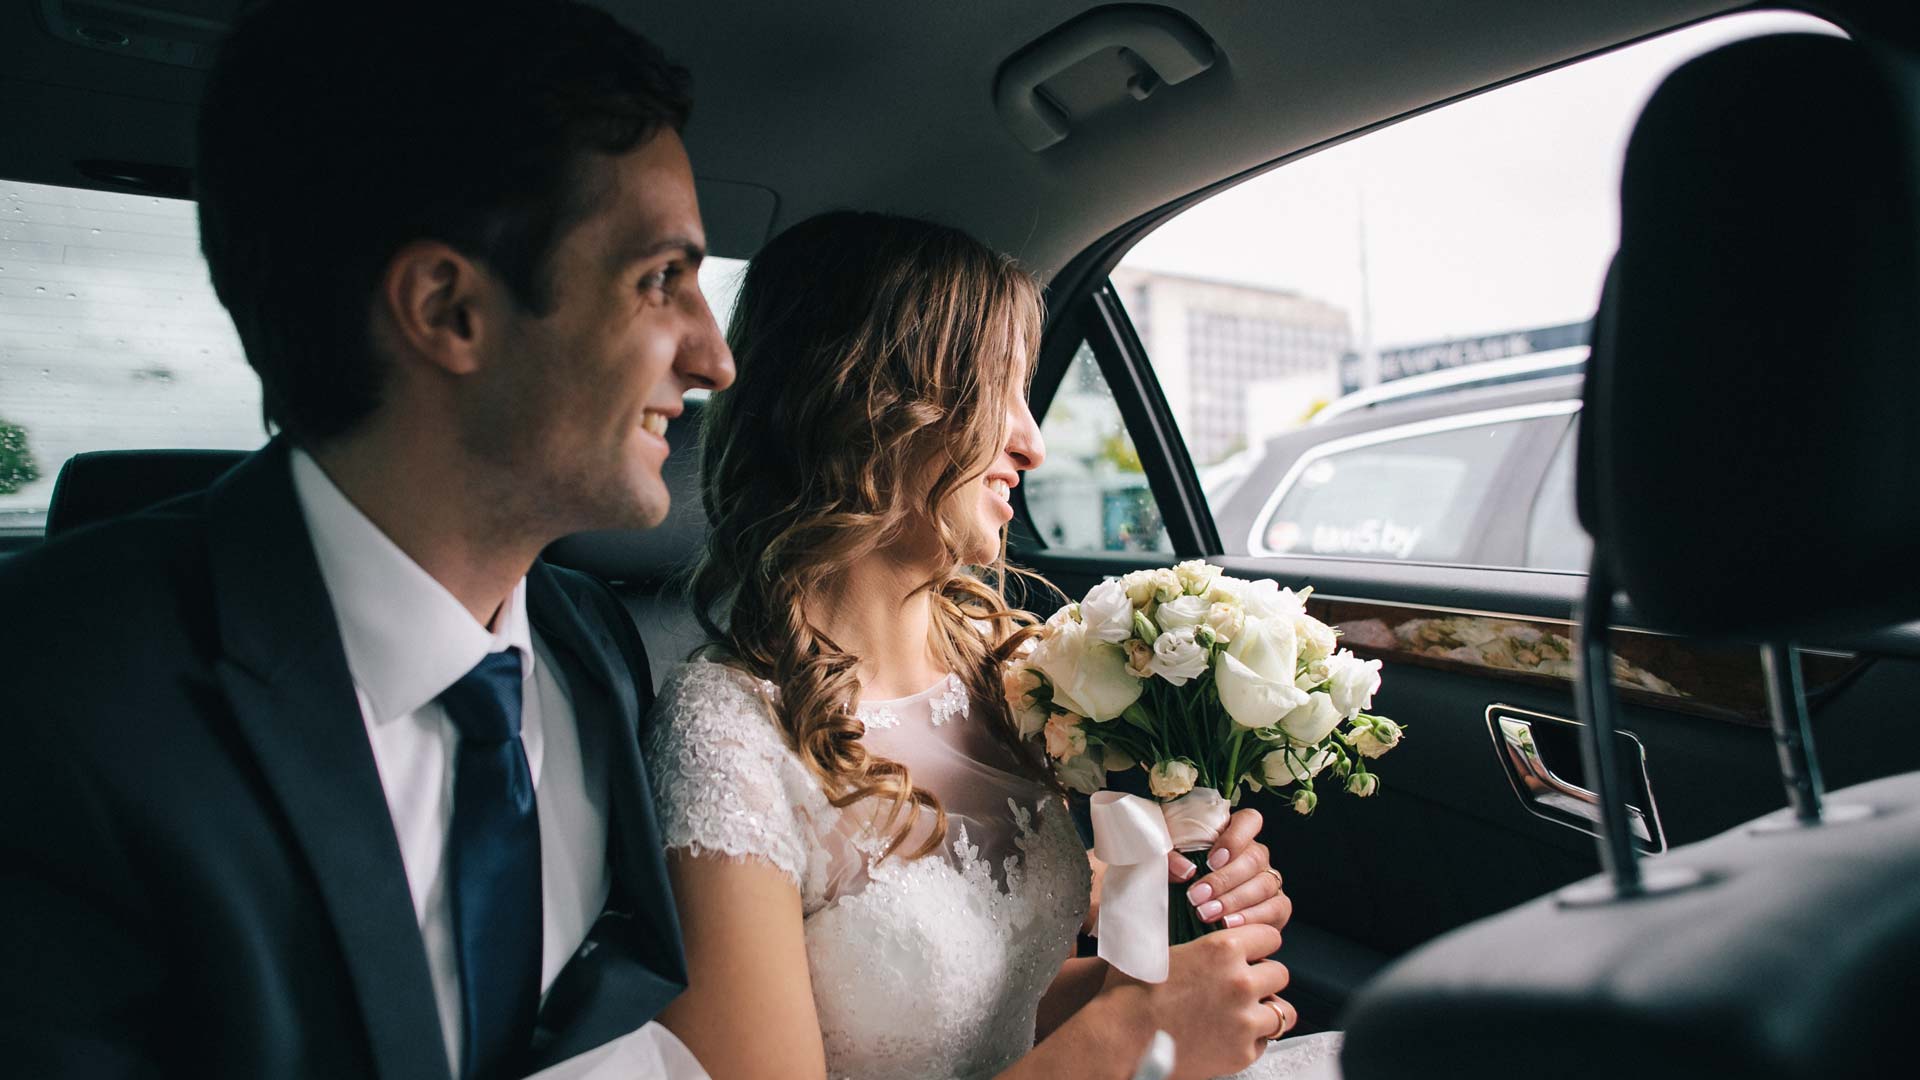 Wedding limo services in Raleigh